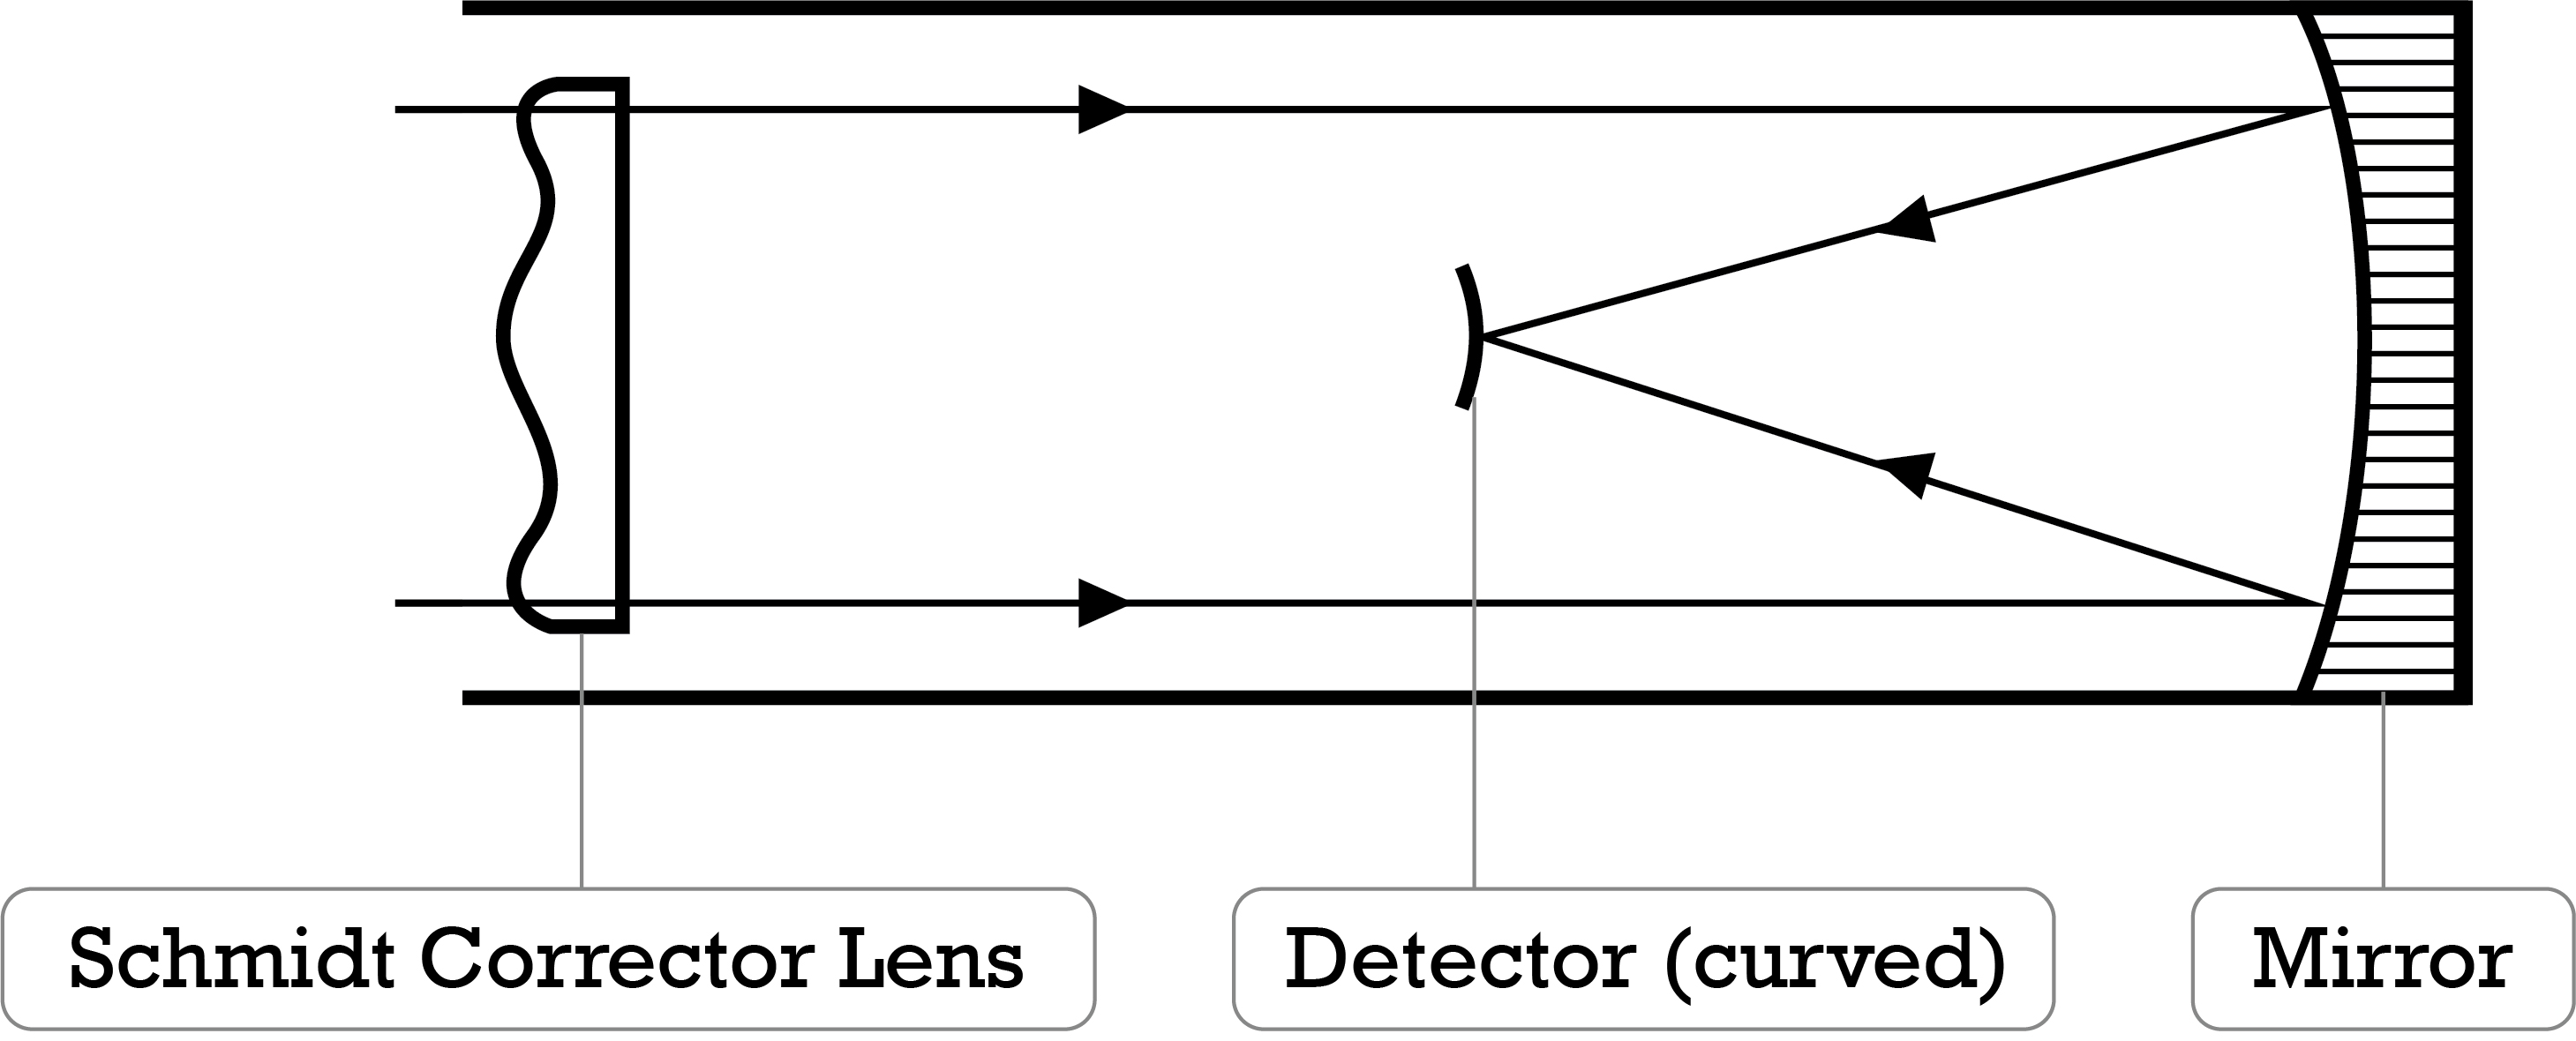 The AIRS spectrometer camera is based on the classical Schmidt camera design shown here